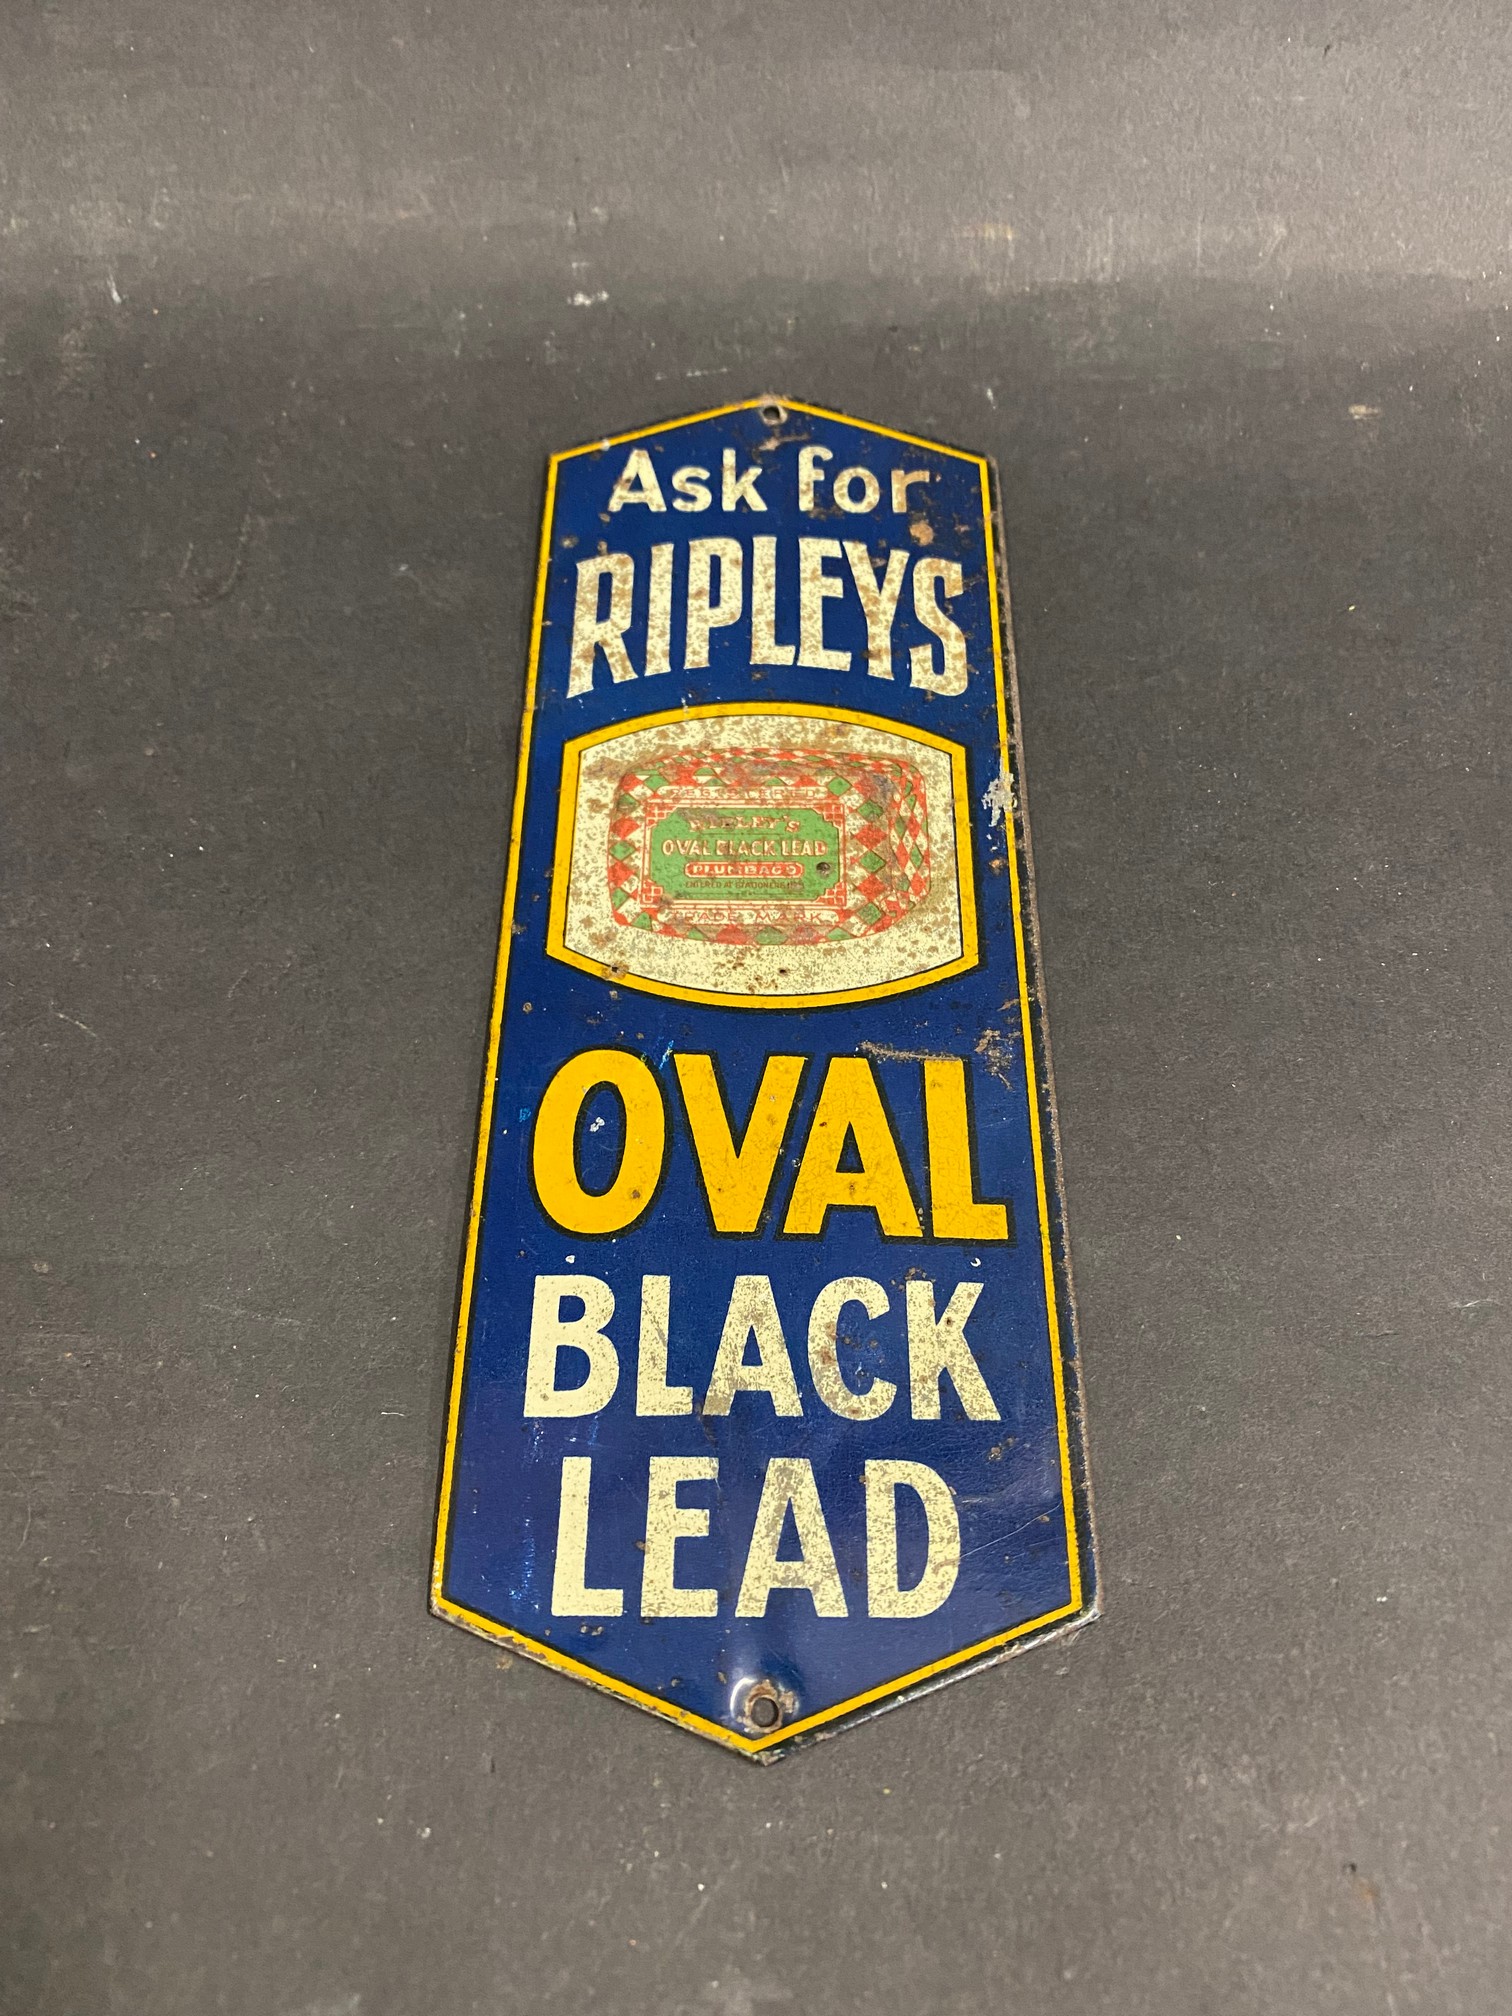 A Ripley's Oval Black Lead tin part pictorial finger plate, 3 x 8 1/2".